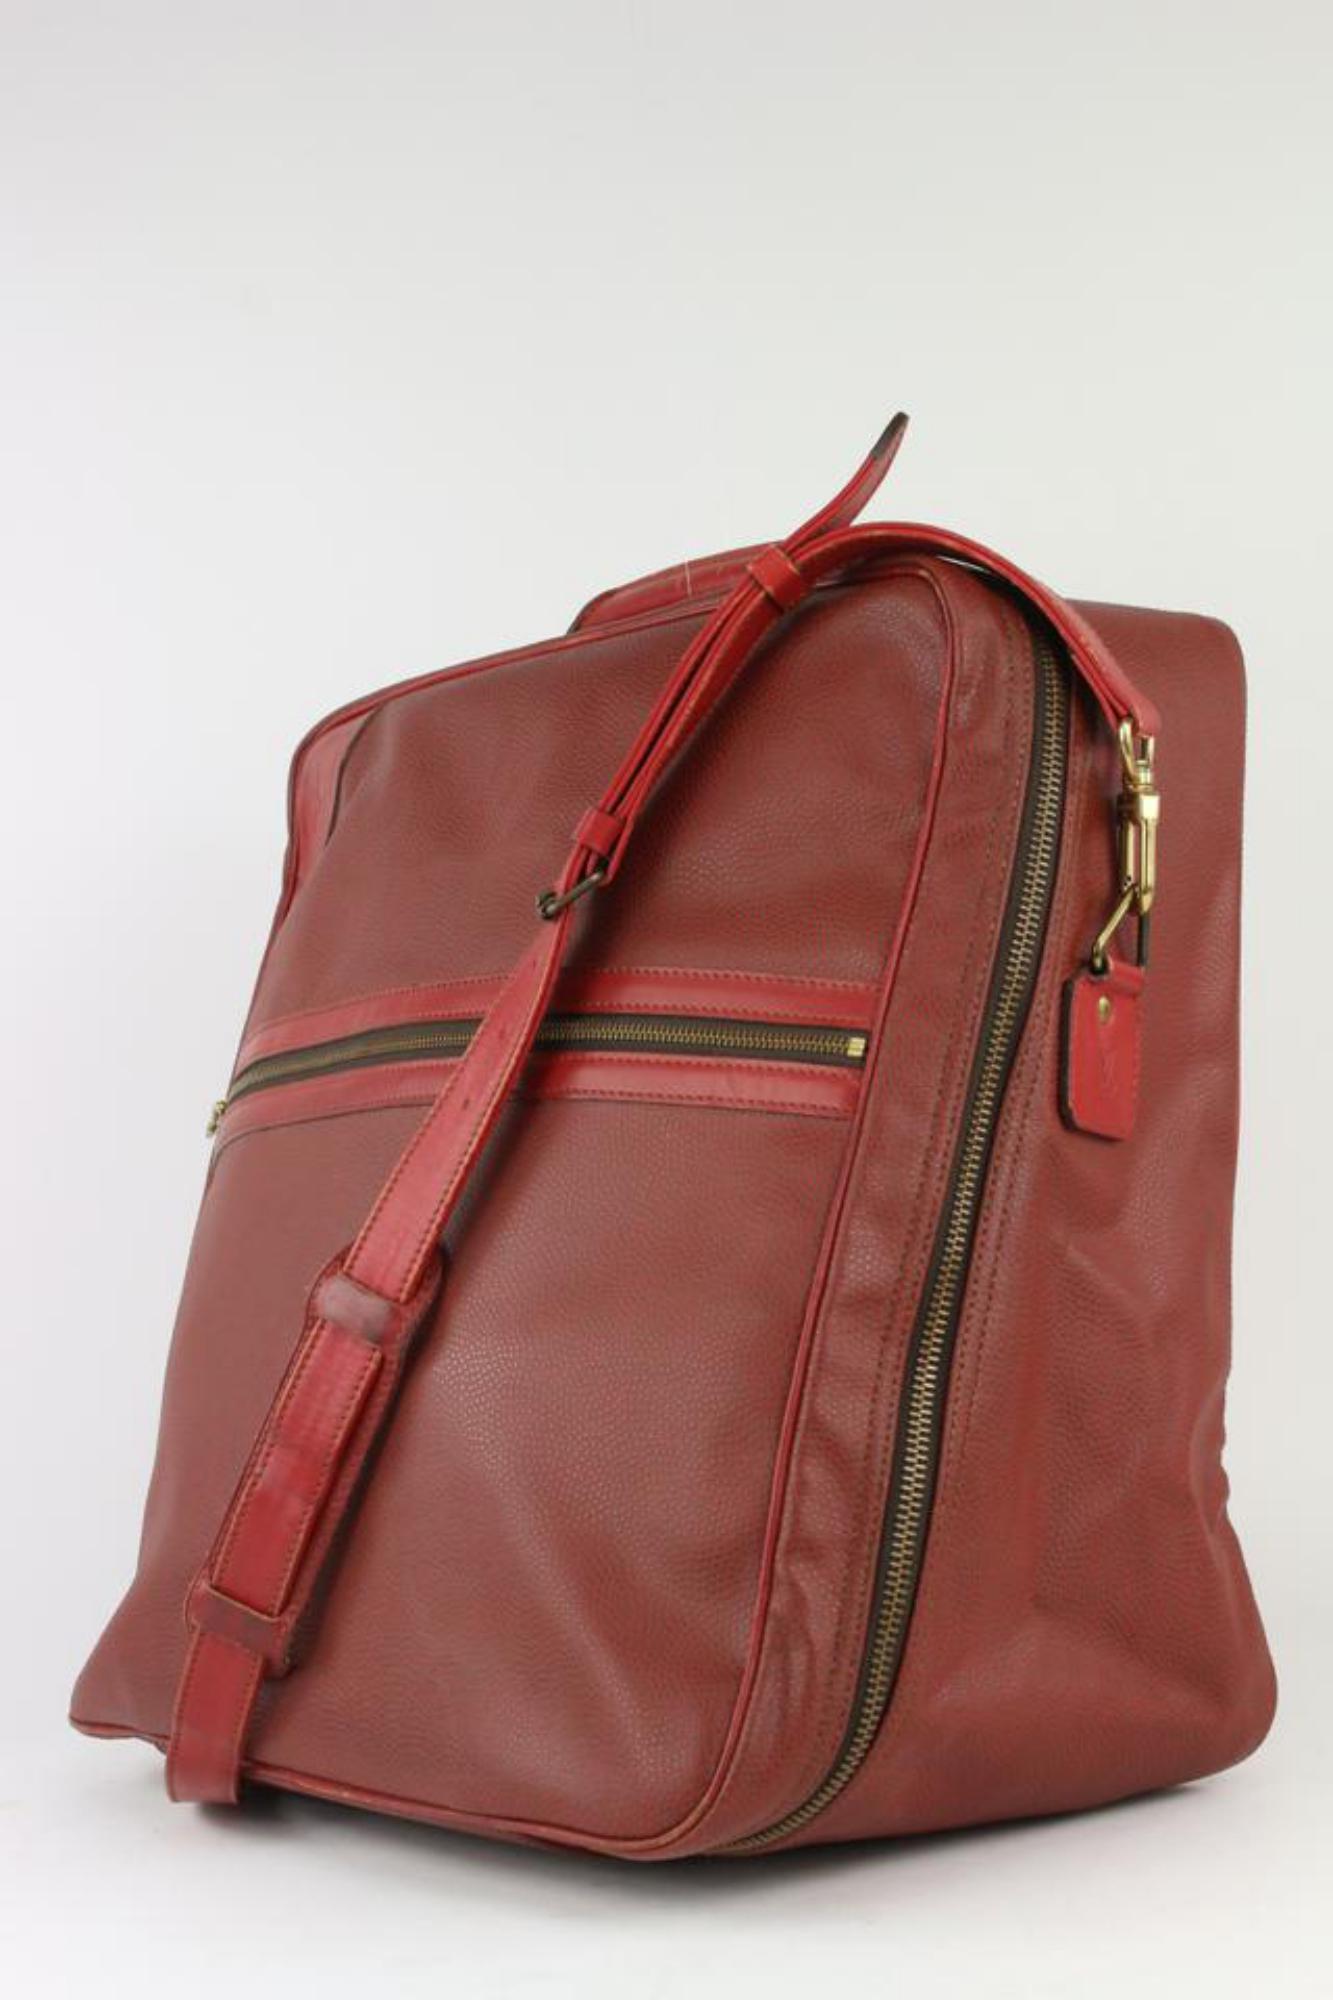 Louis Vuitton 1986 LV Cup Red Travel Bag 5LL1021 For Sale 7